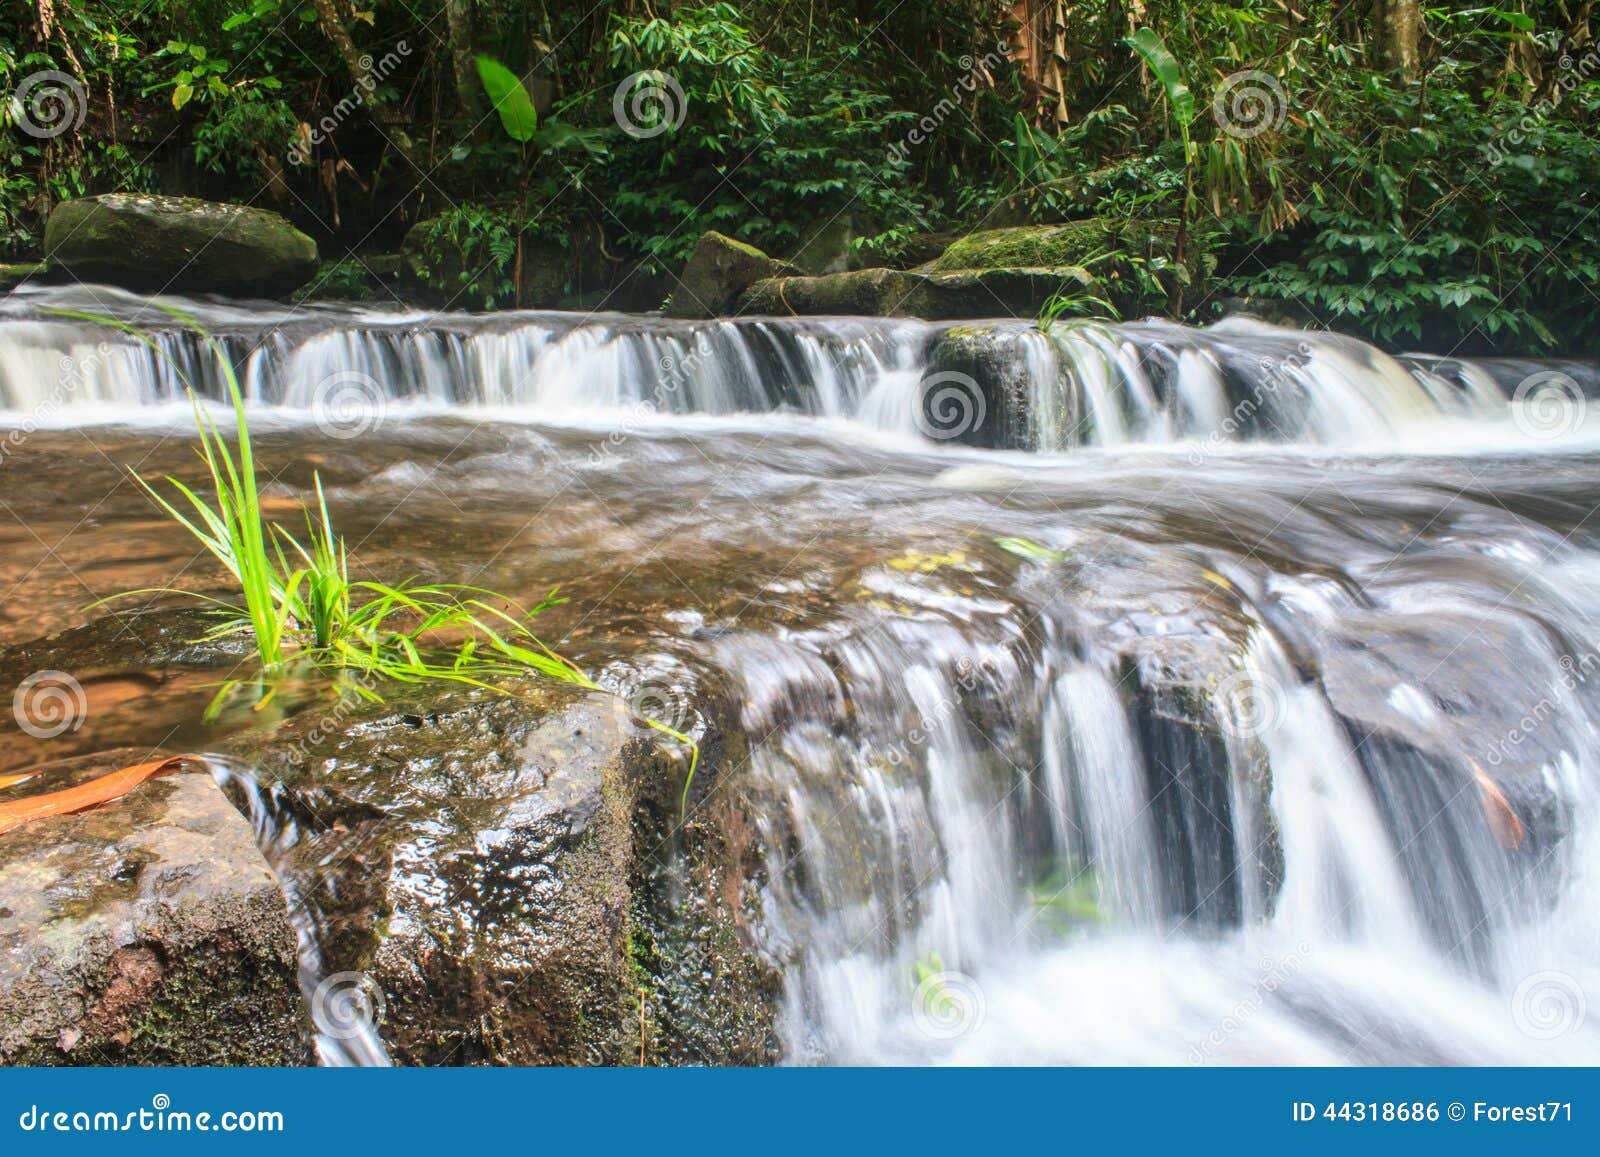 Waterfall And Rocks Covered With Moss Stock Photo Image Of Leaf